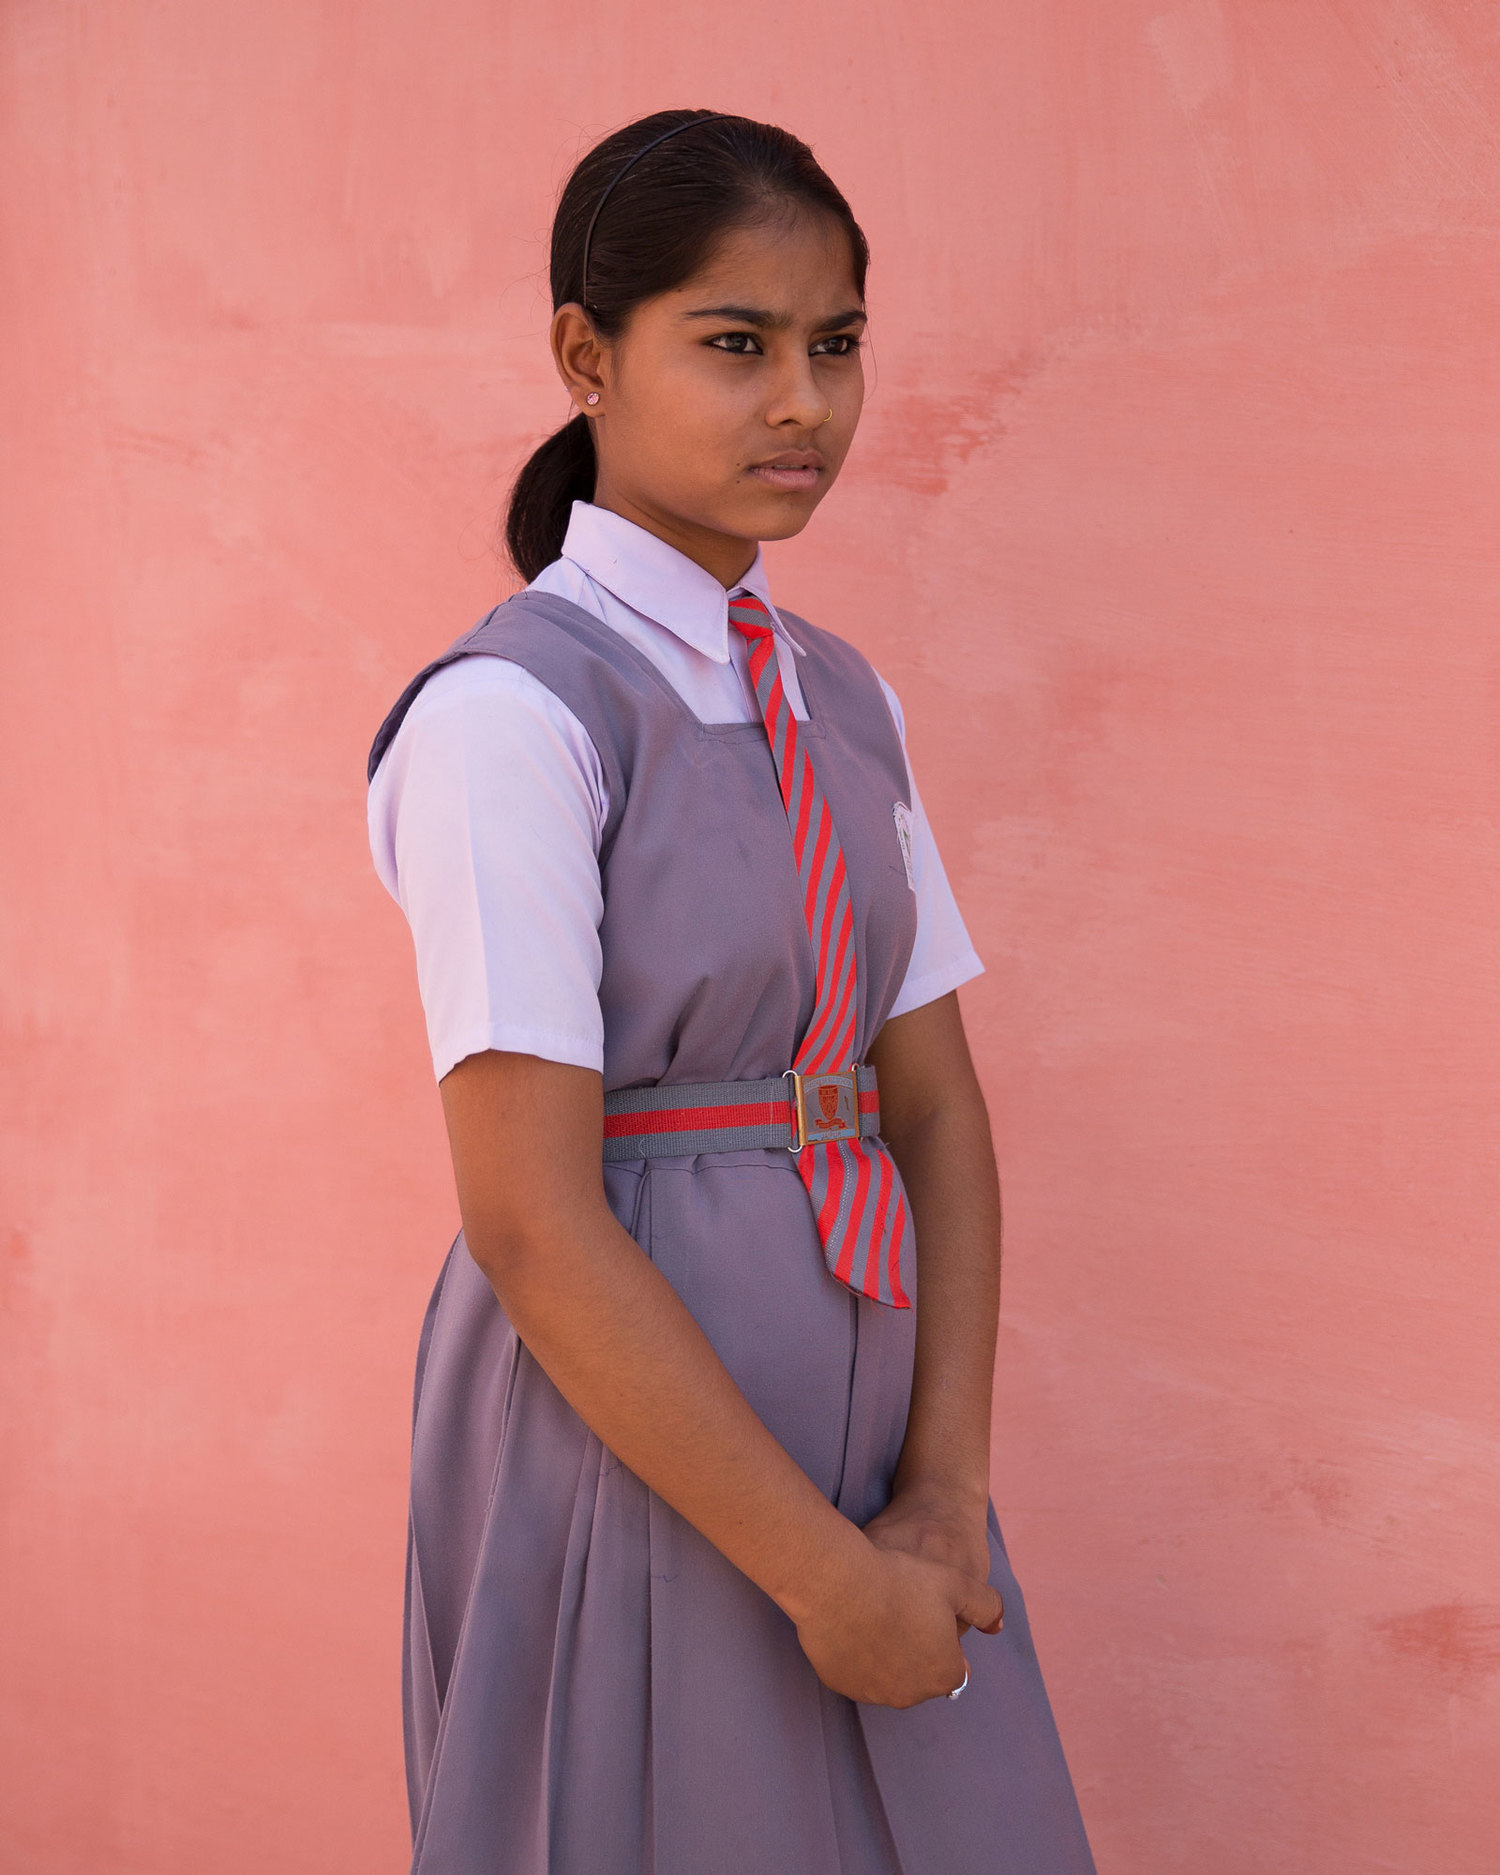   Alka Verma, 6th class.  "I want to be a teacher and be helpful in the raising of children. Our school is outstanding. I received a new life from it." 